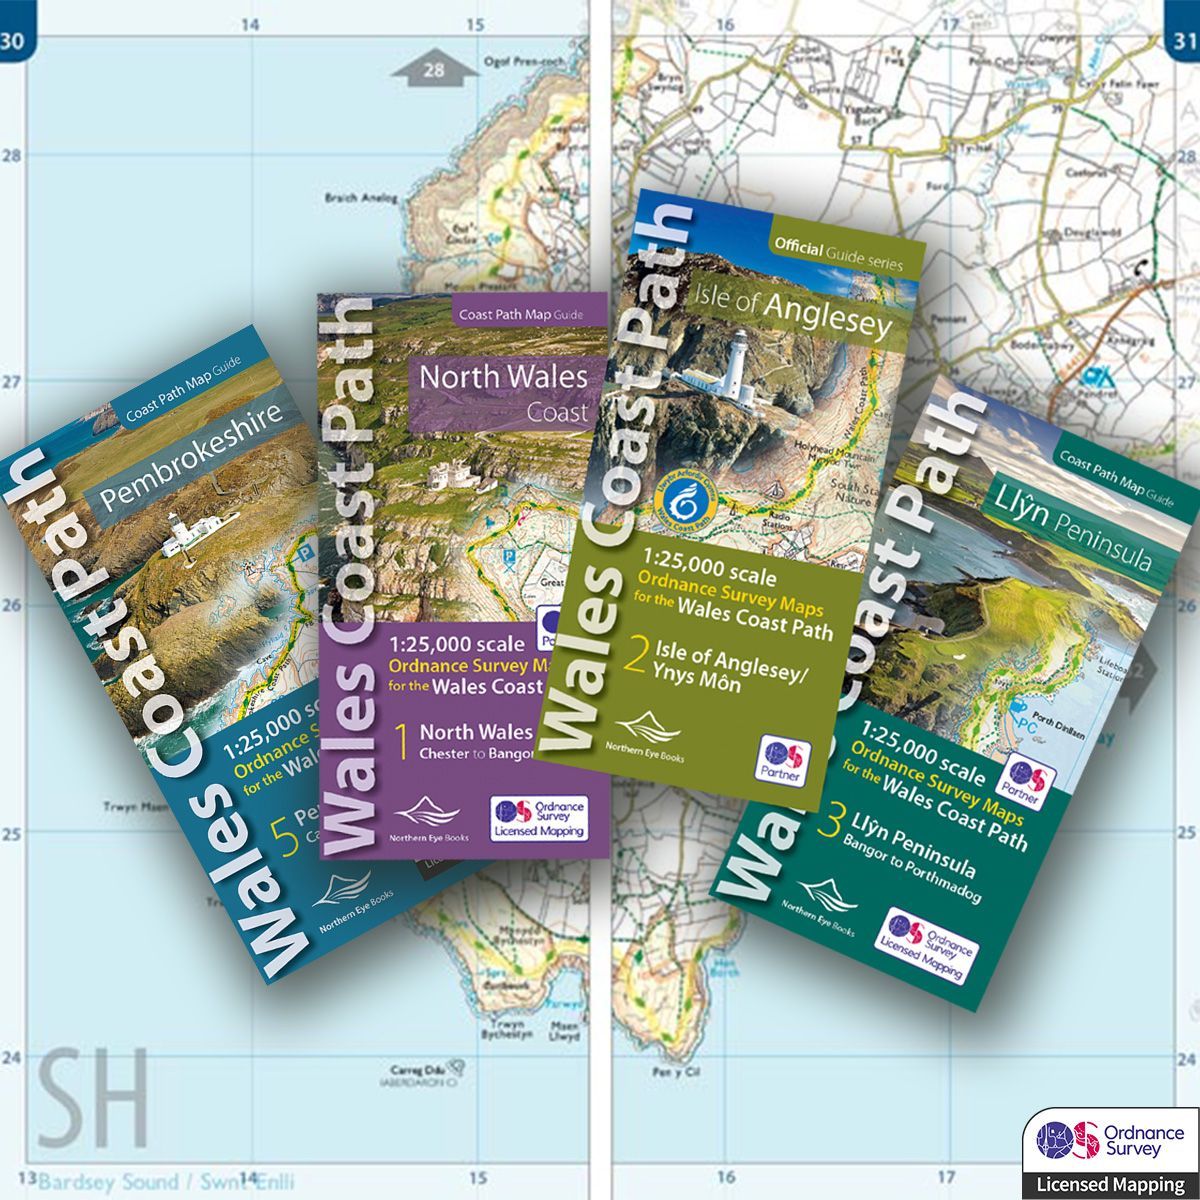 Our range of Ordnance Survey Map Books currently cover North Wales, Anglesey, the Llŷn Peninsula and Pembrokeshire - don't worry, we're working hard on the rest! 🙂 Available online at buff.ly/3n1bbsx and from local map stockists. #WalesCoastPath #LlwybrArfordirCymru